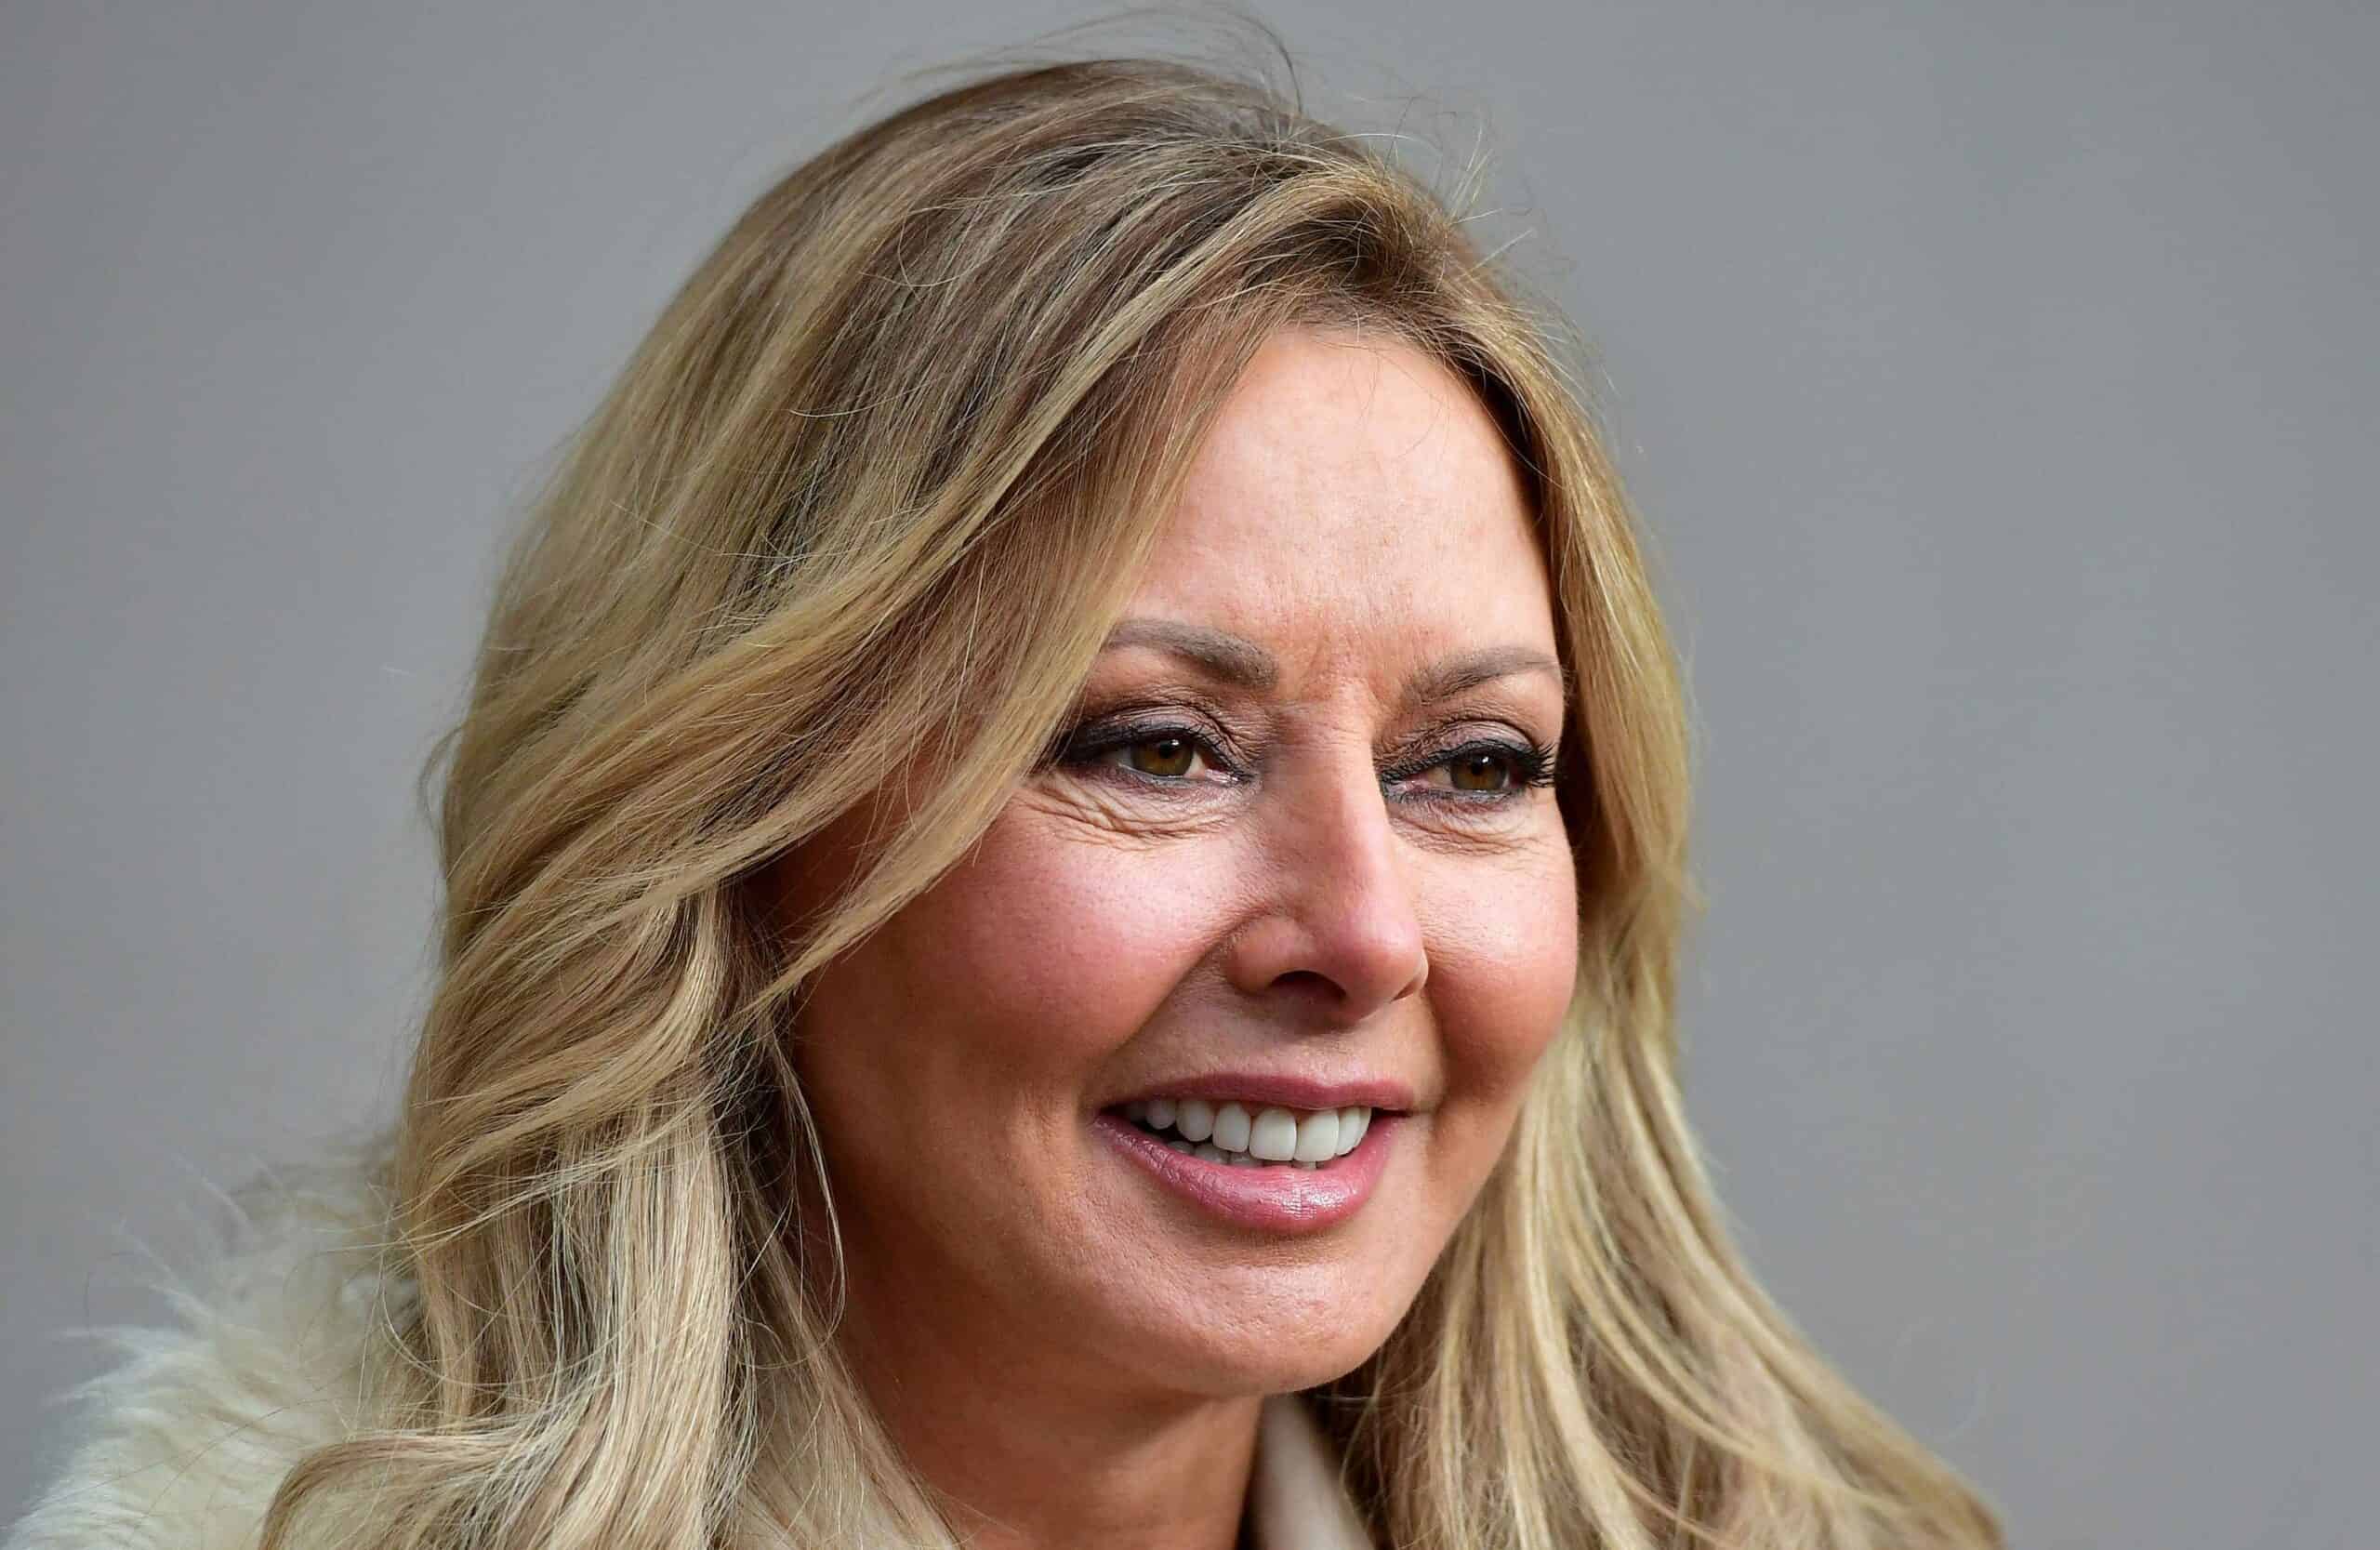 Carol Vorderman for PM: Focus group pick Countdown star to run the country